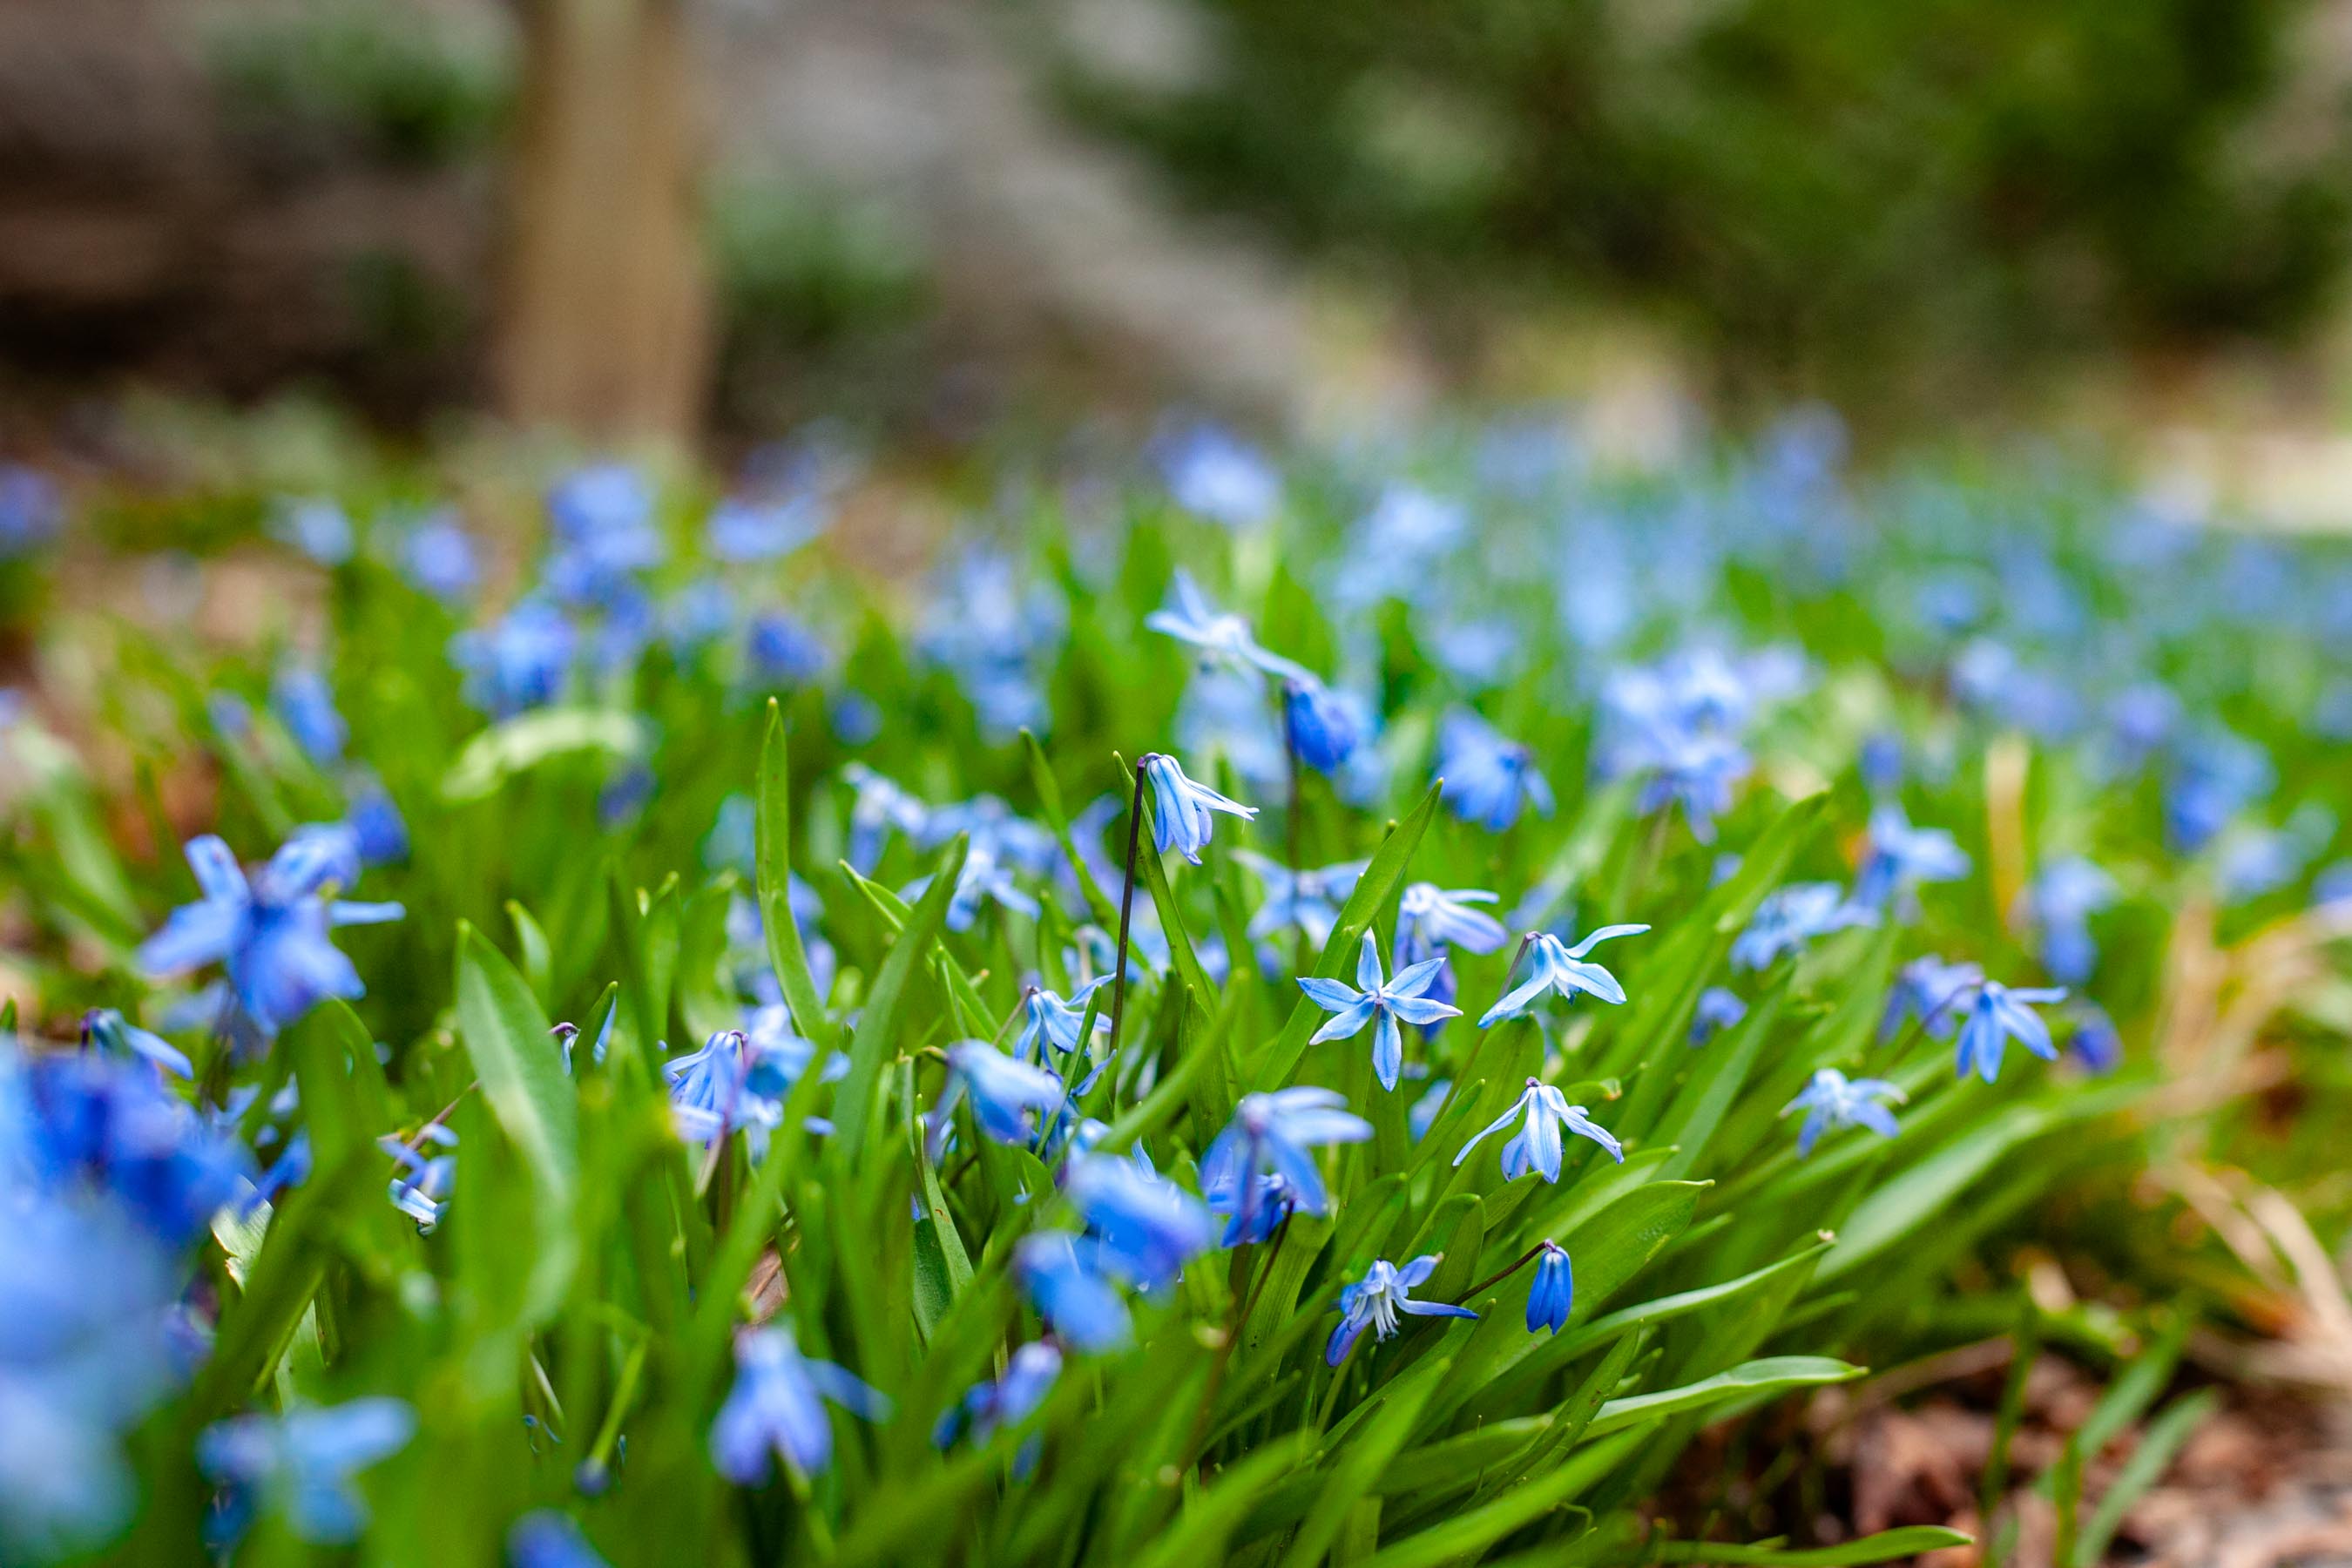 The blue crocuses appear after a day doing yardwork in early spring.